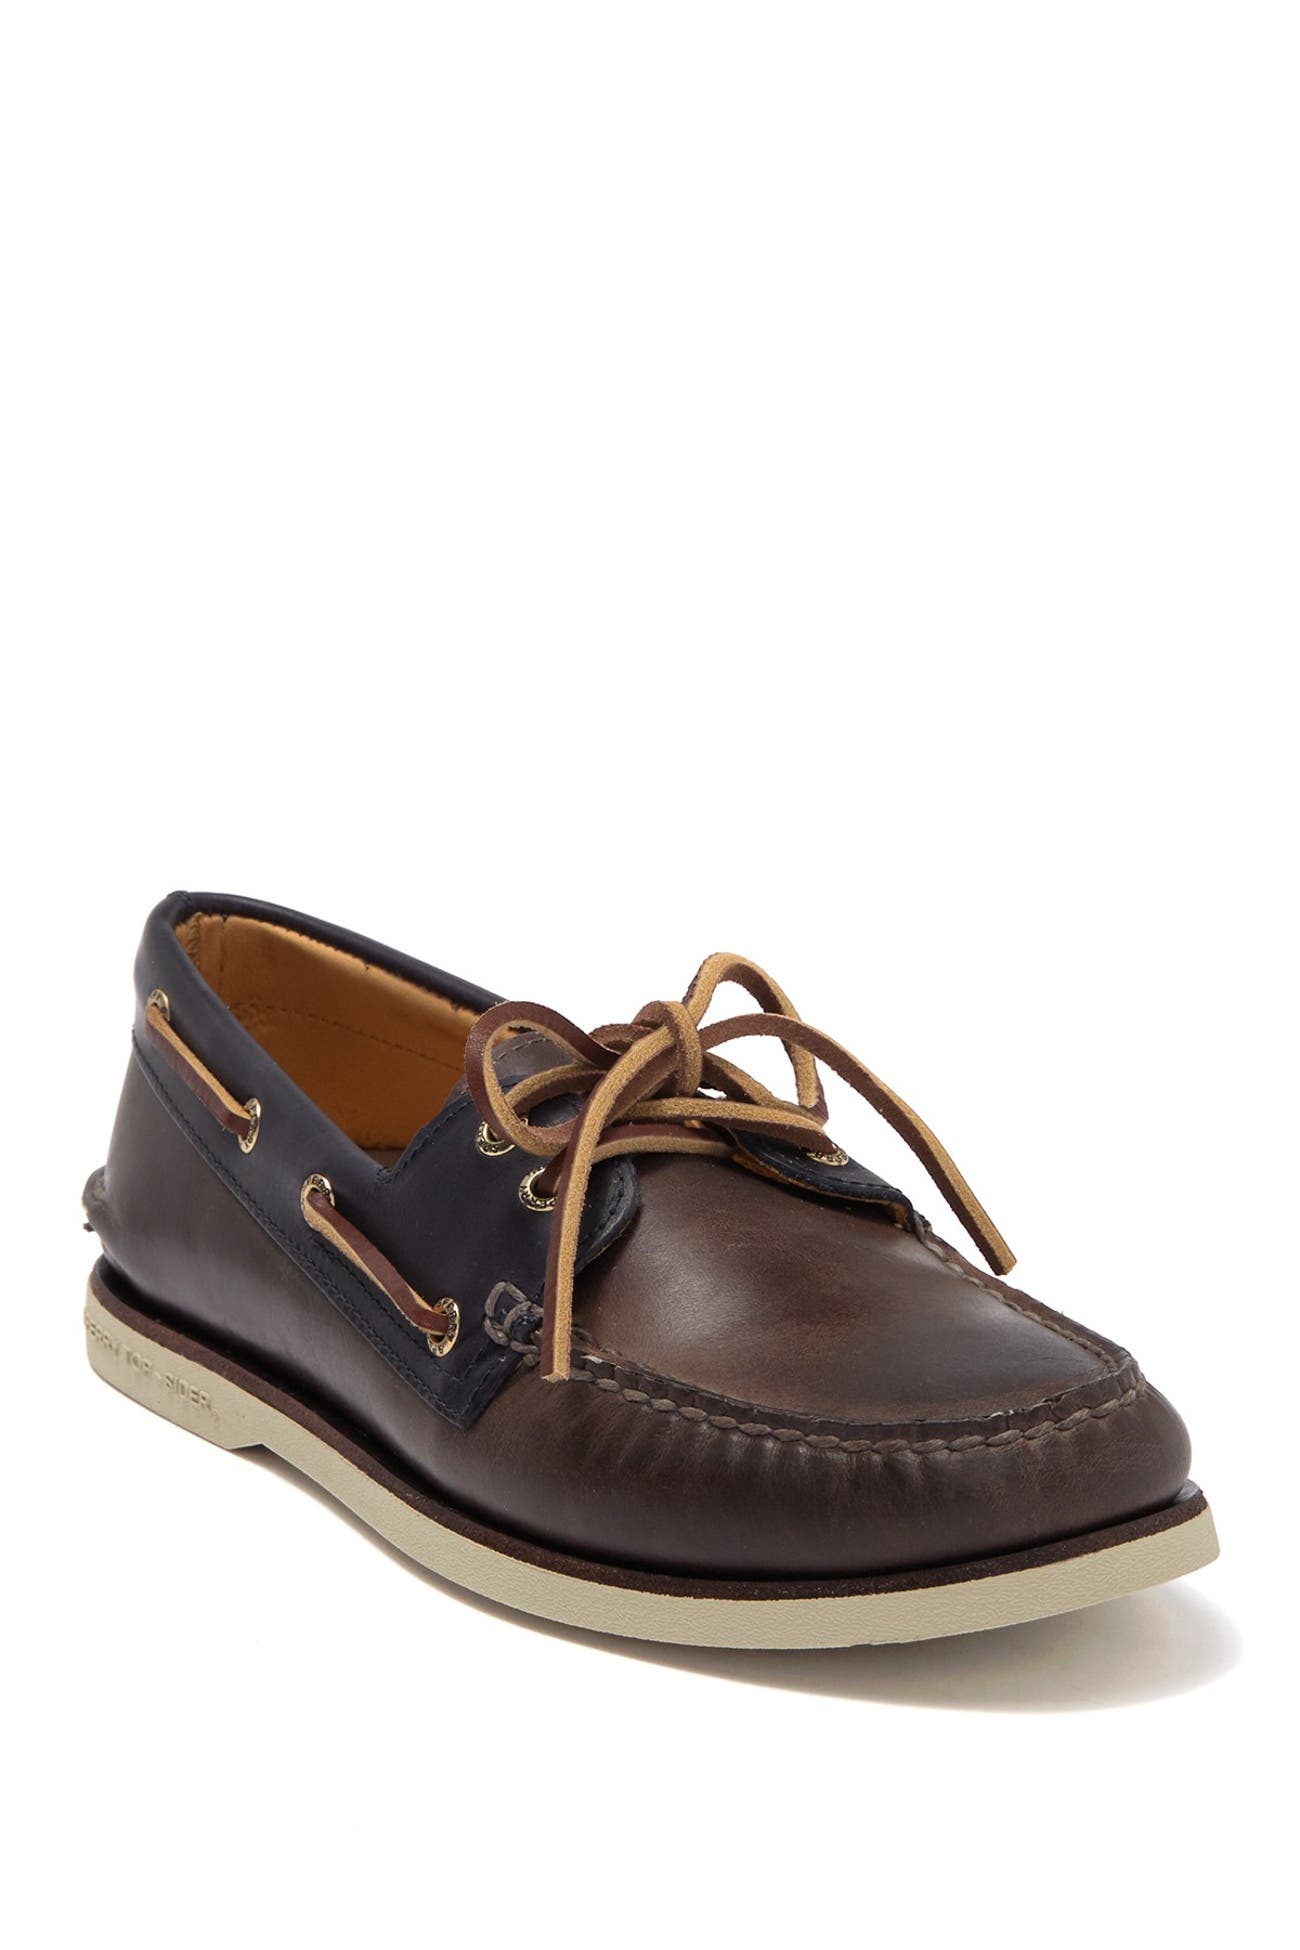 Sperry | Gold Cup Authentic Original 2-Eye Revenge Boat Shoe ...